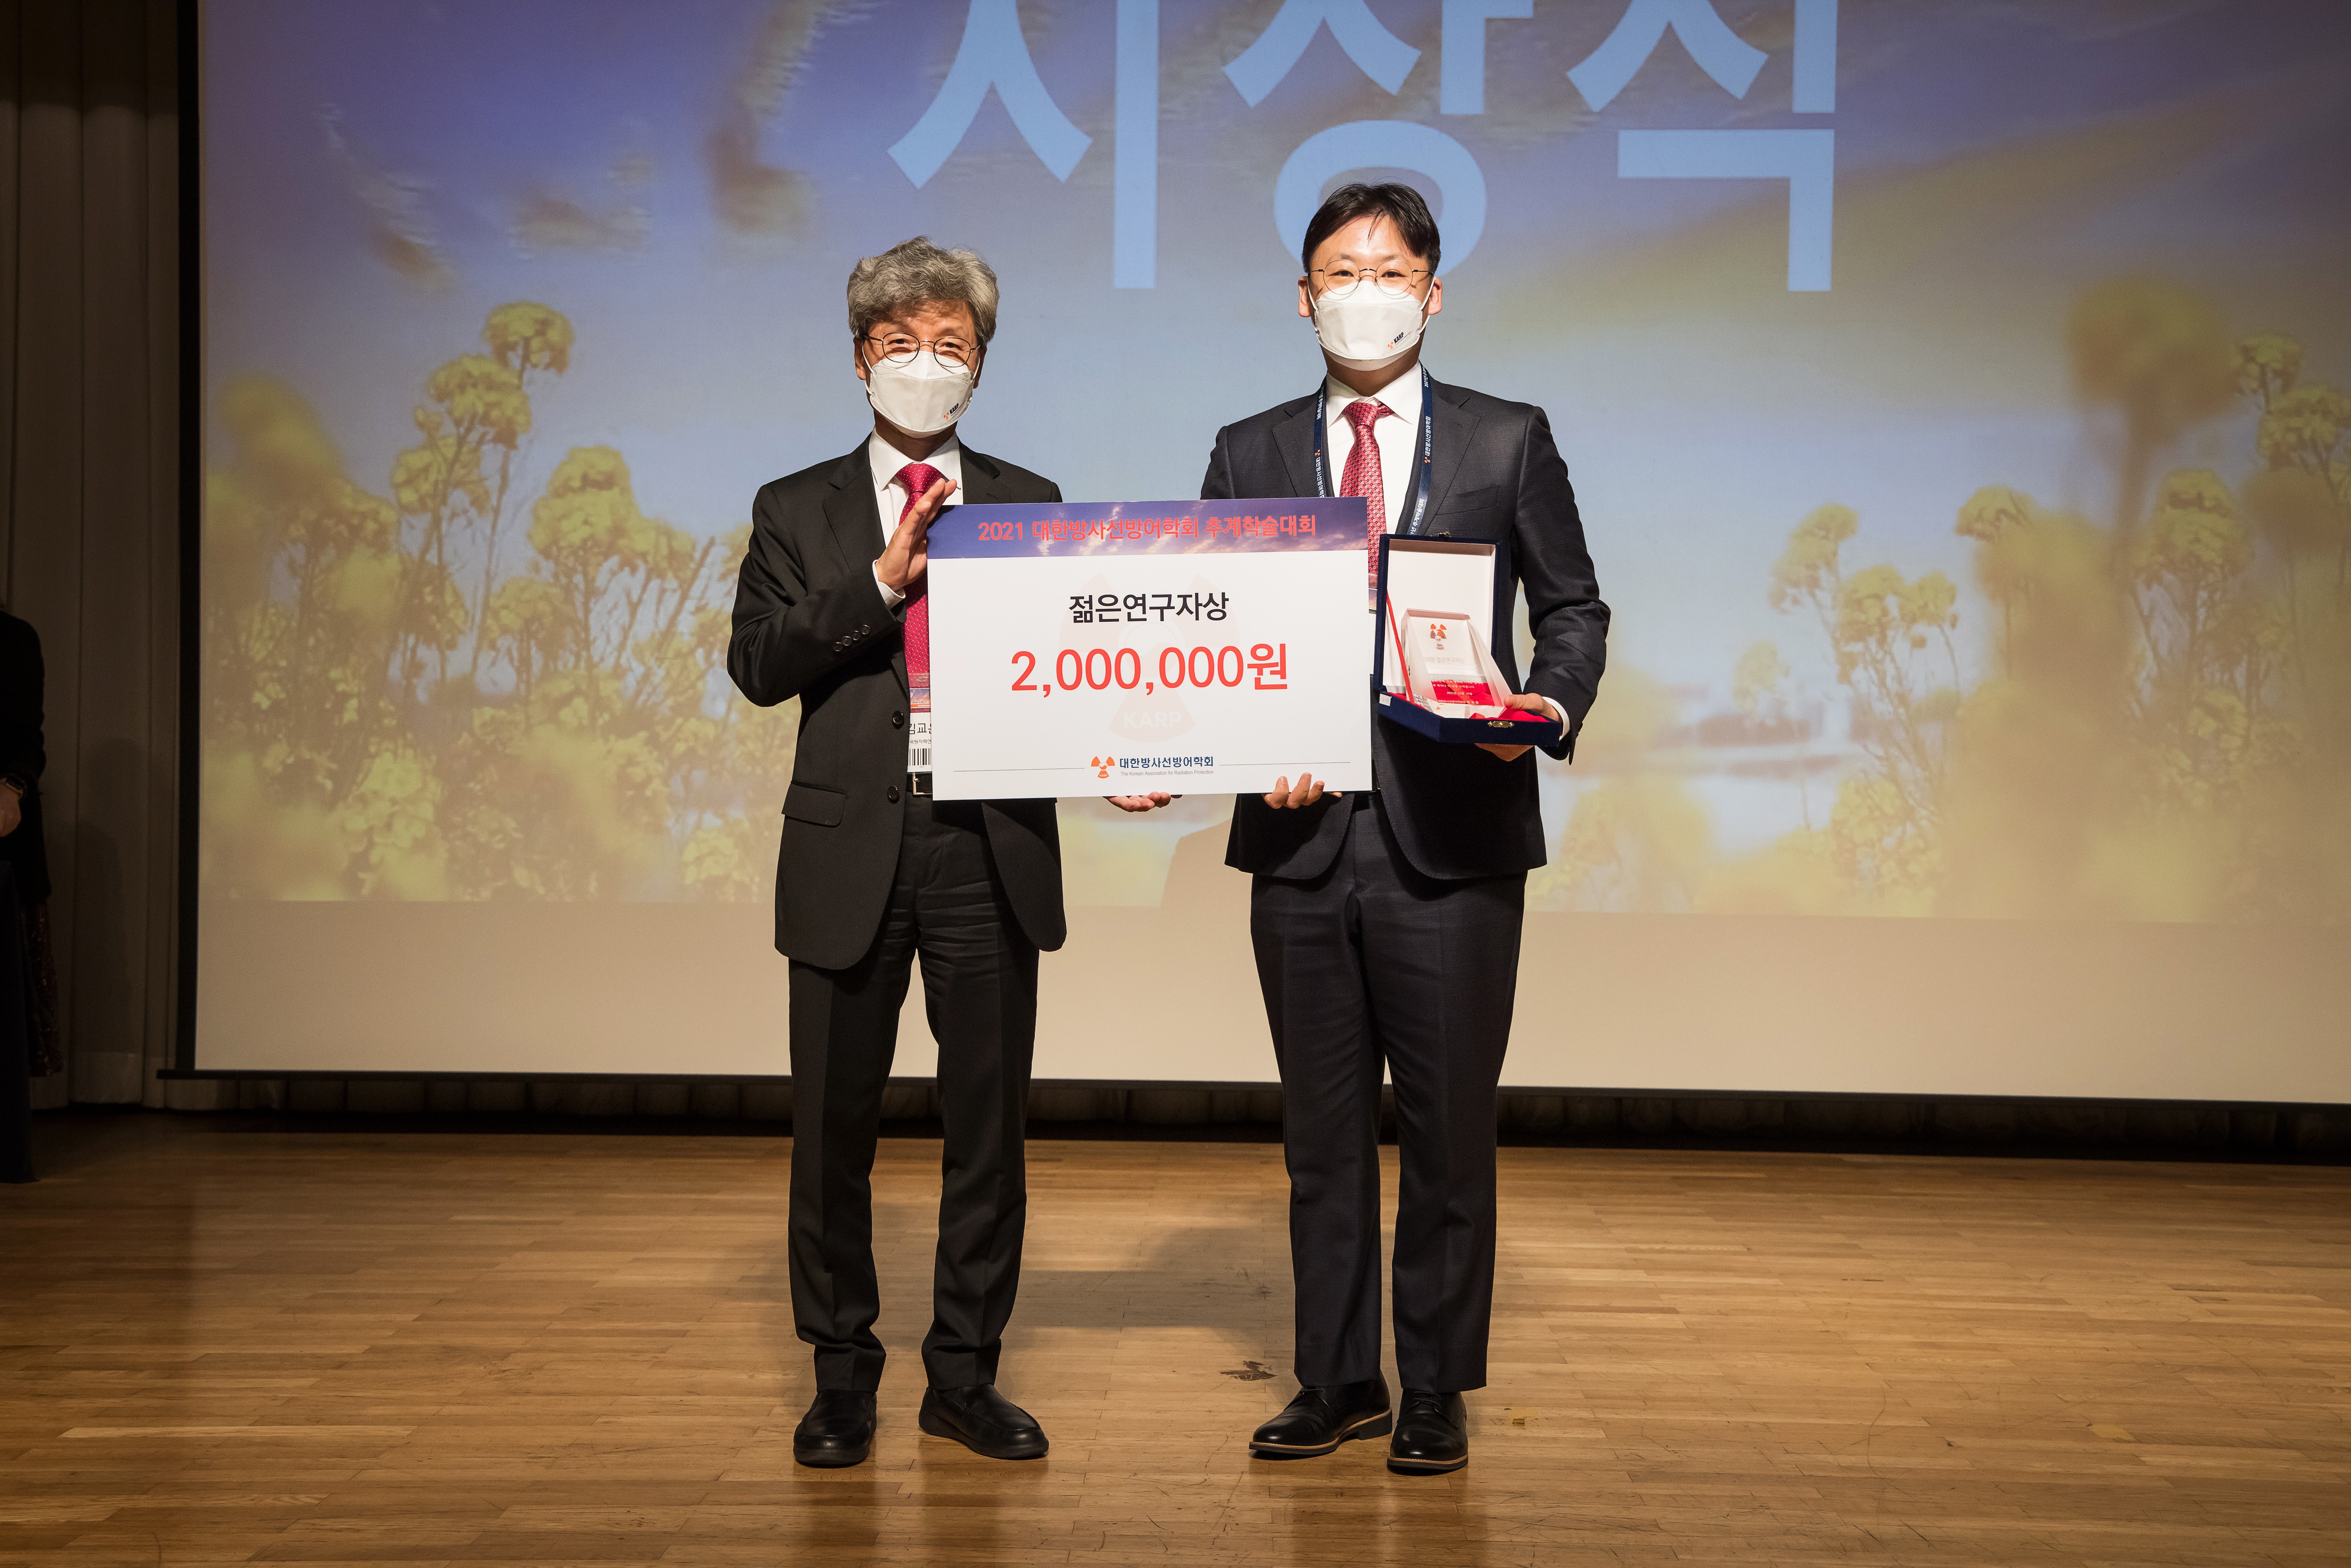 Professor Geehyun Kim of the Department of Nuclear Engineering Receives the Young Researcher Award at the 2021 Autumn Conference of the Korea Association for Radiation Protection